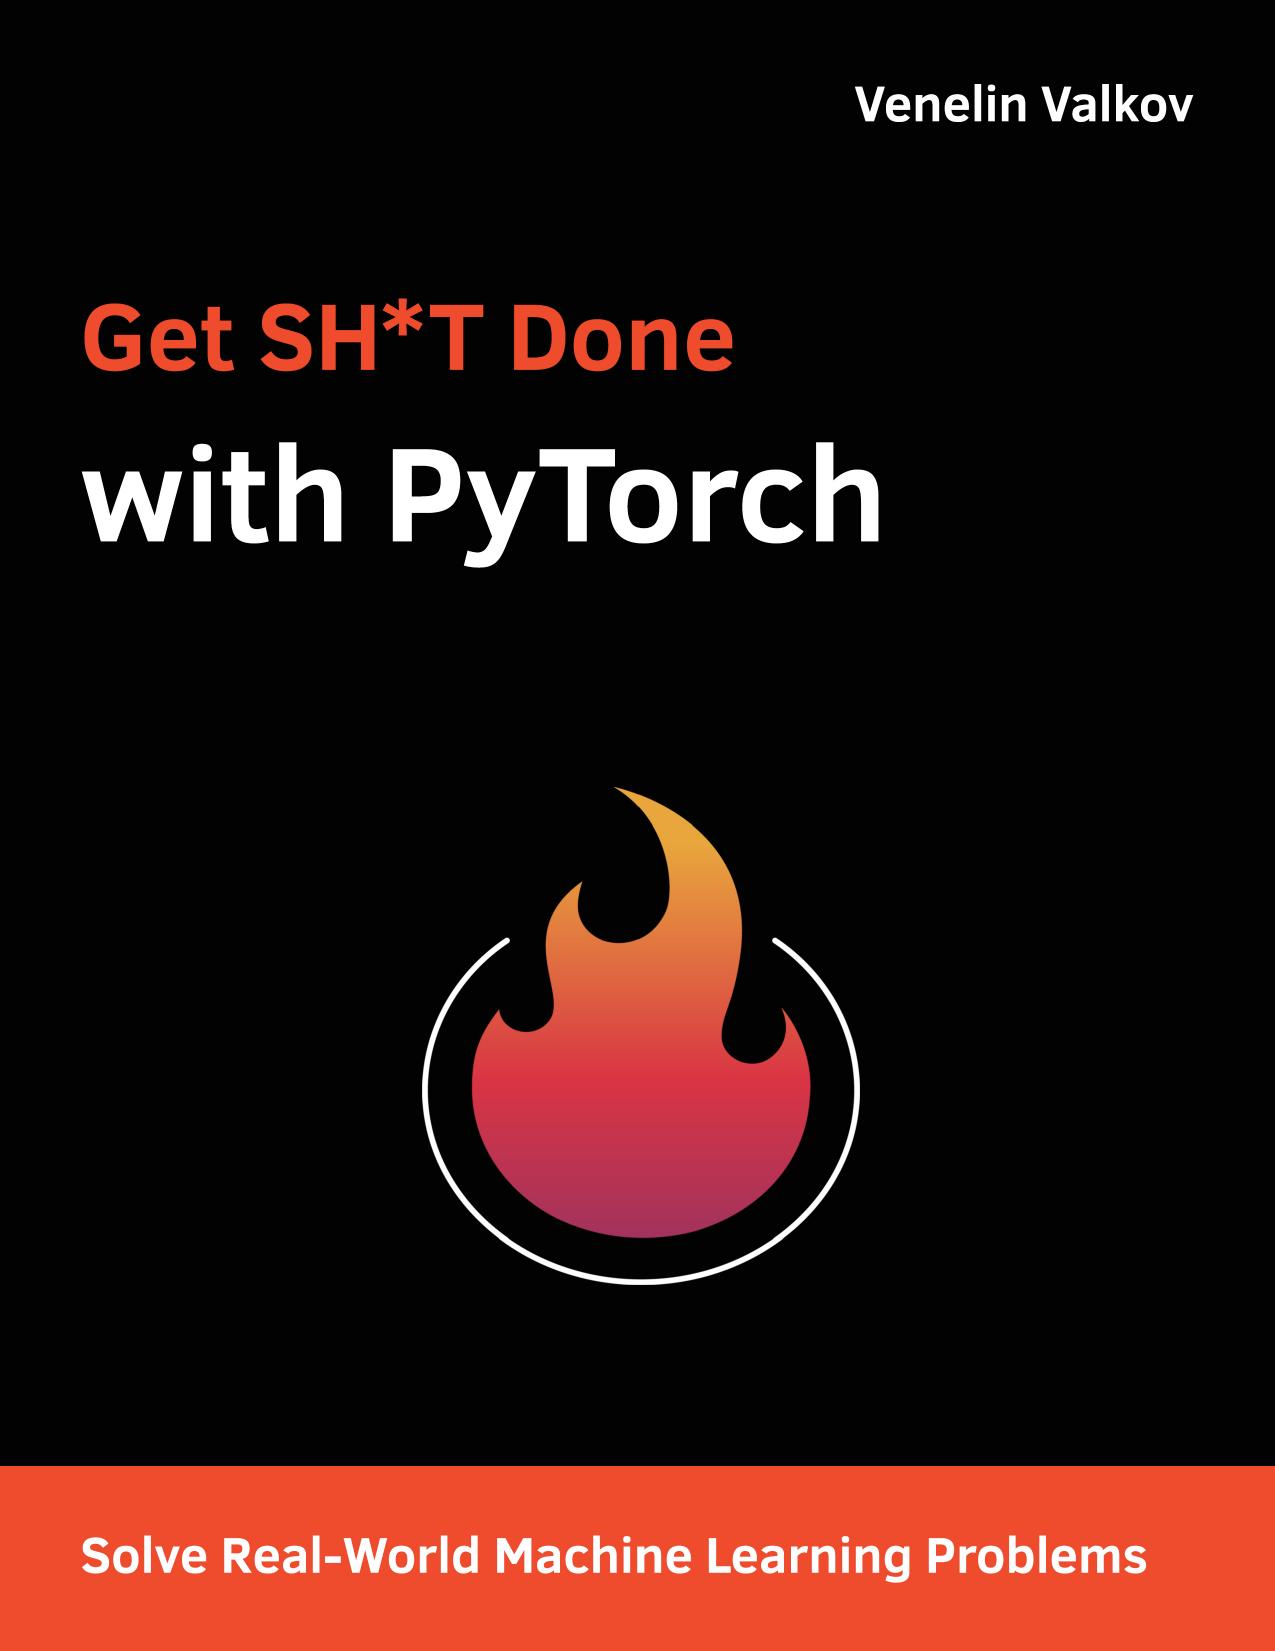 Get SHT Done with PyTorch